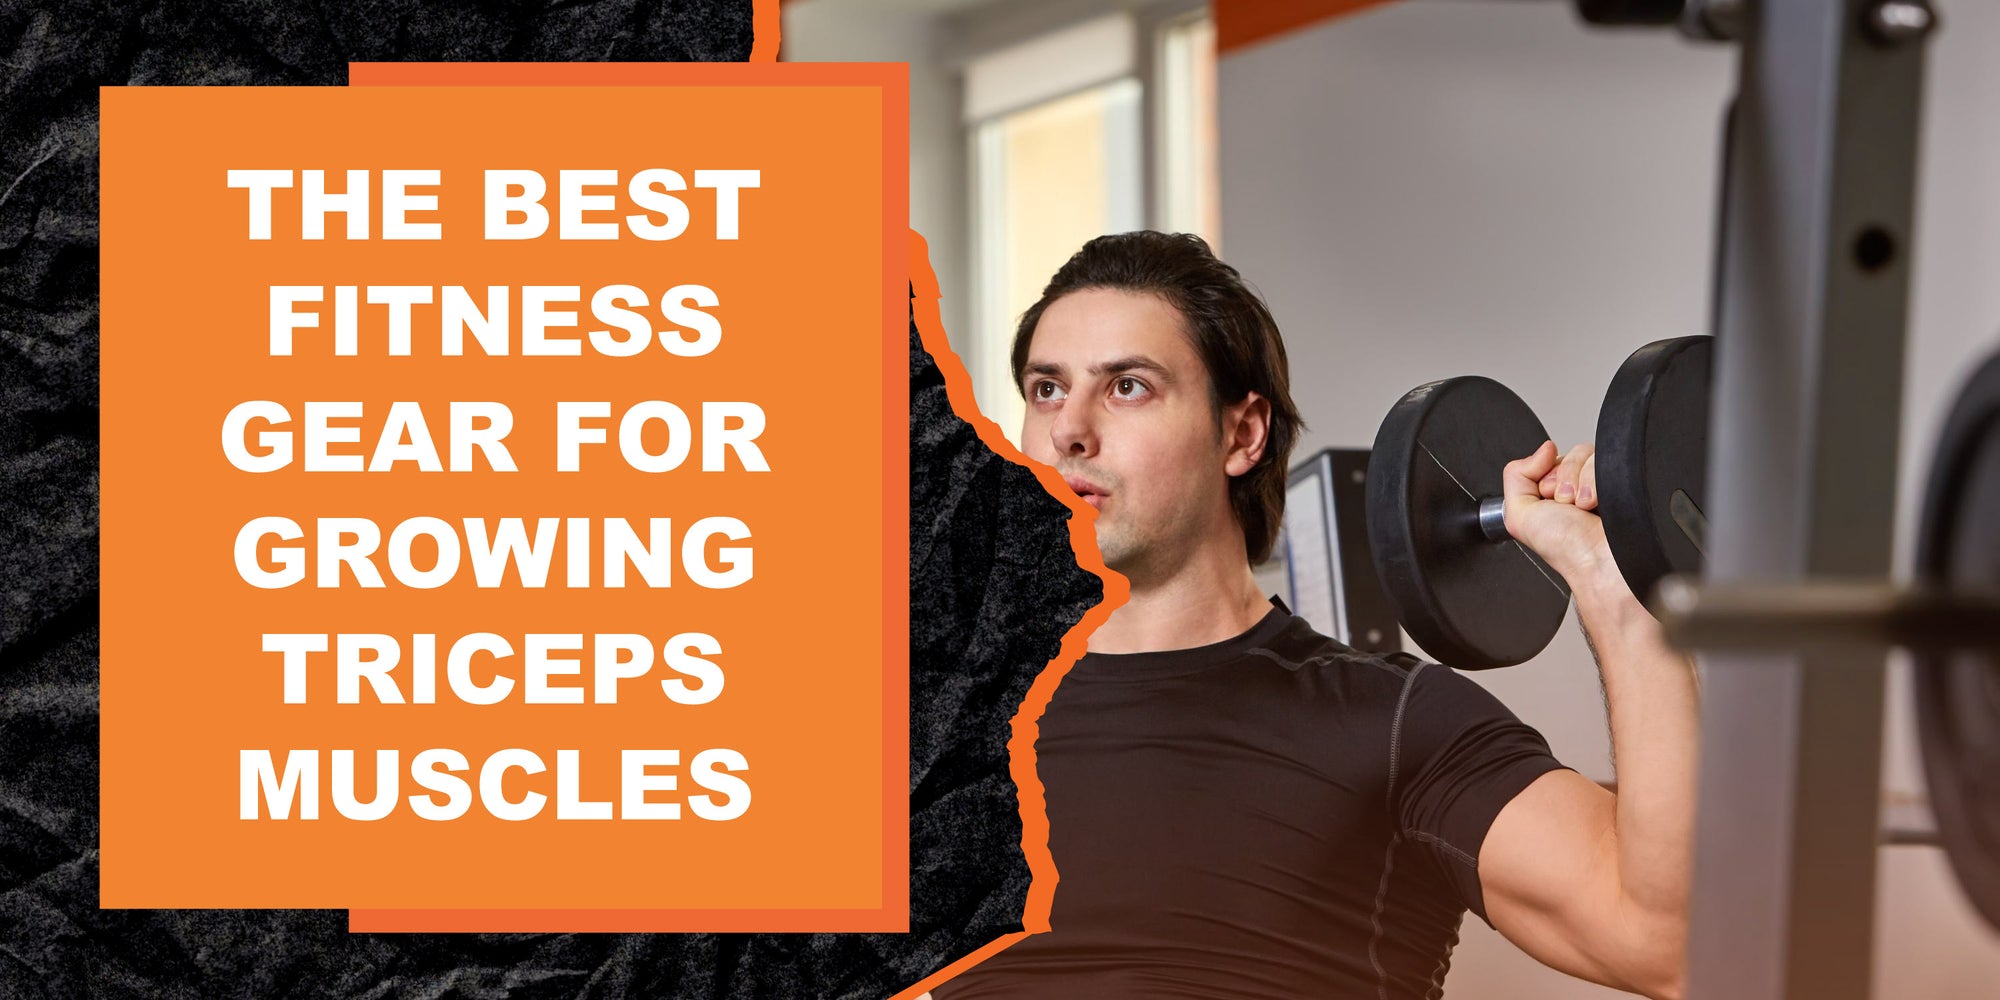 The Best Fitness Gear for Growing Triceps Muscles